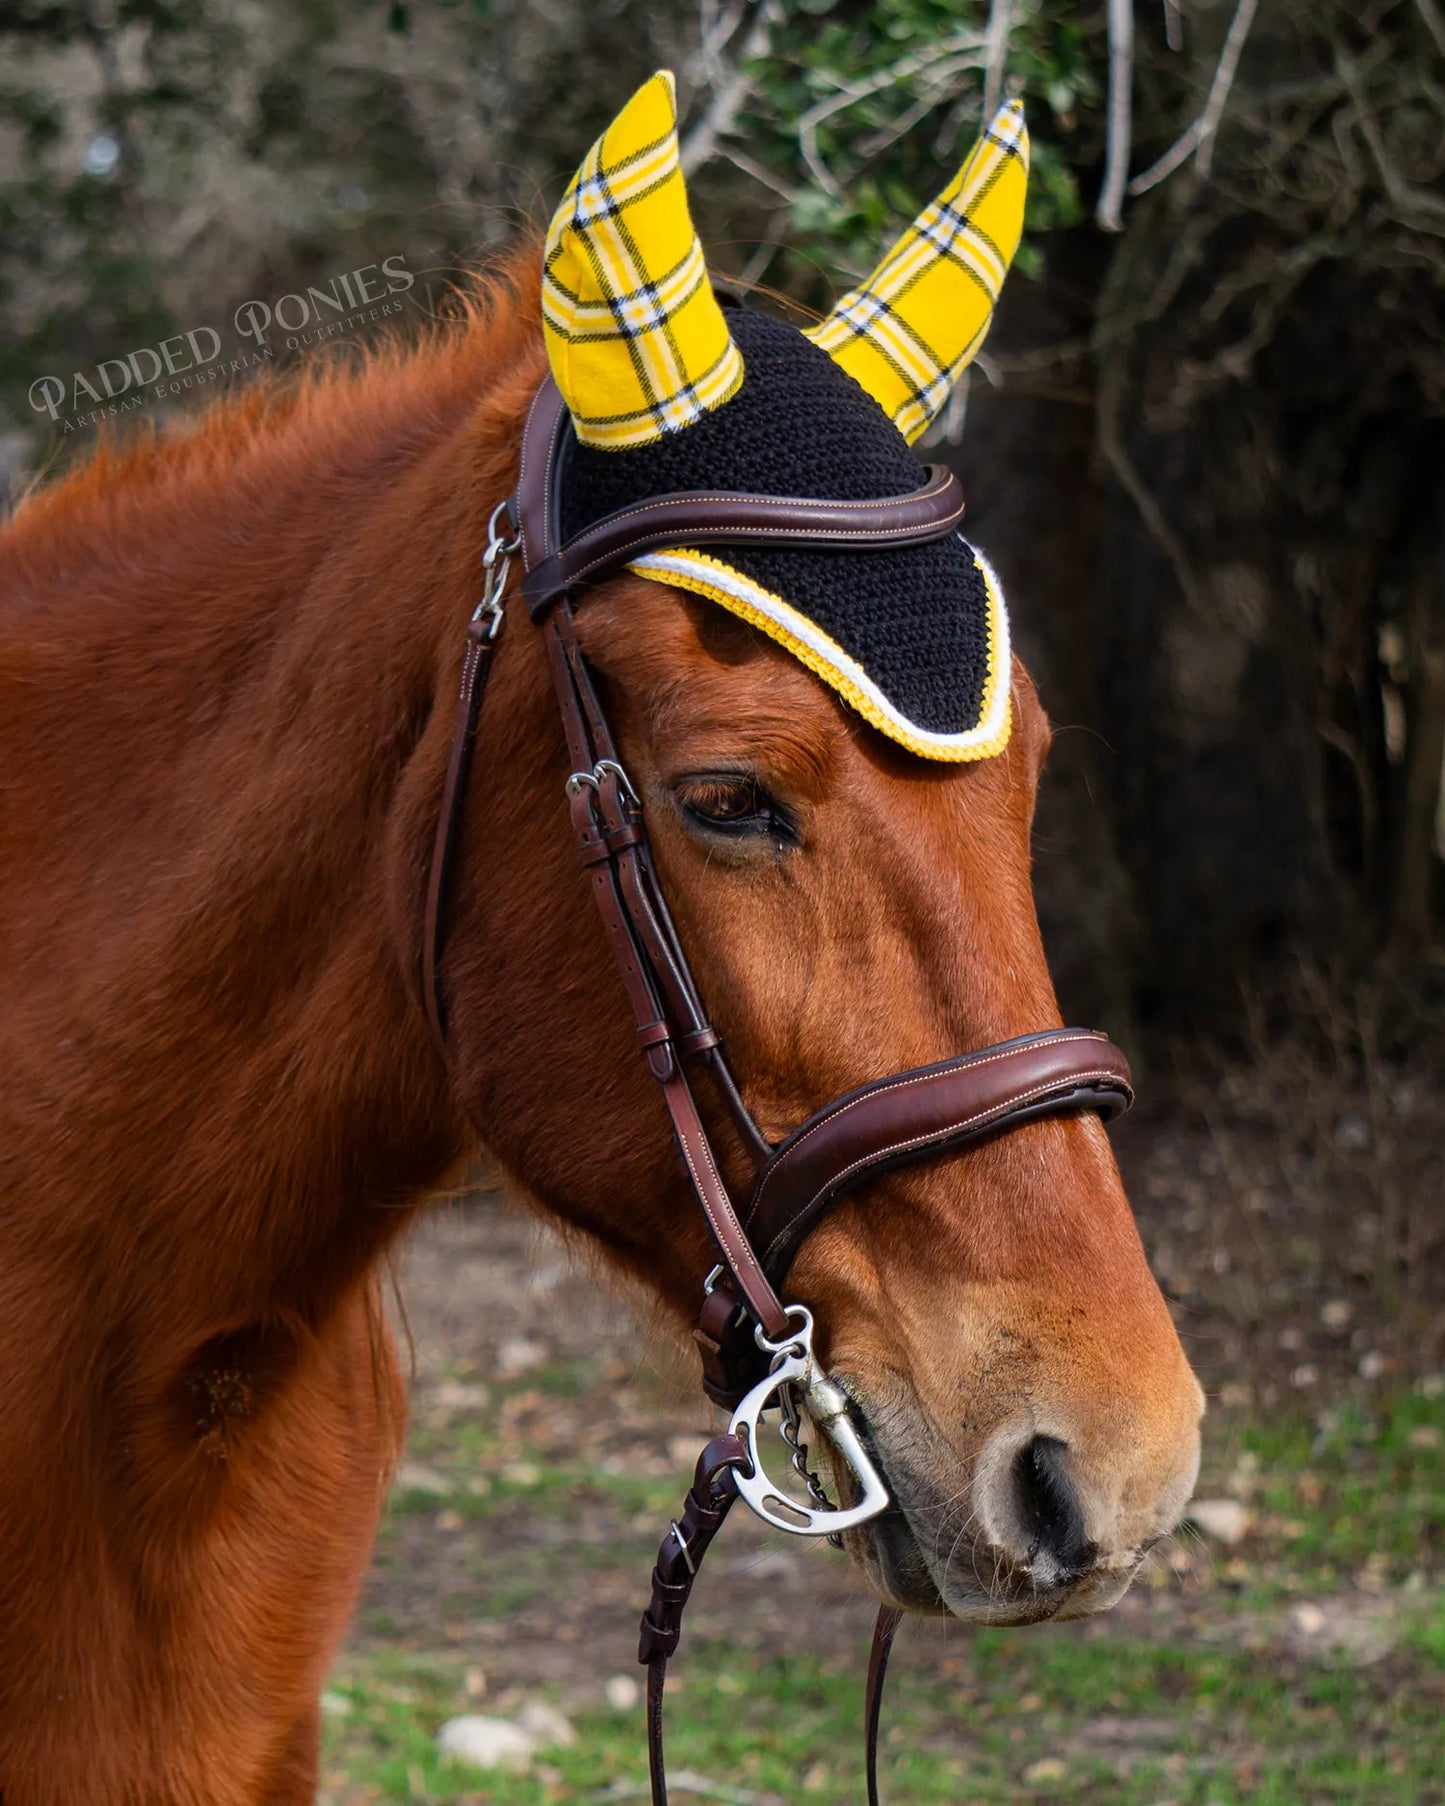 Yellow, Black, and White Plaid Flannel Fly Veil Bonnet